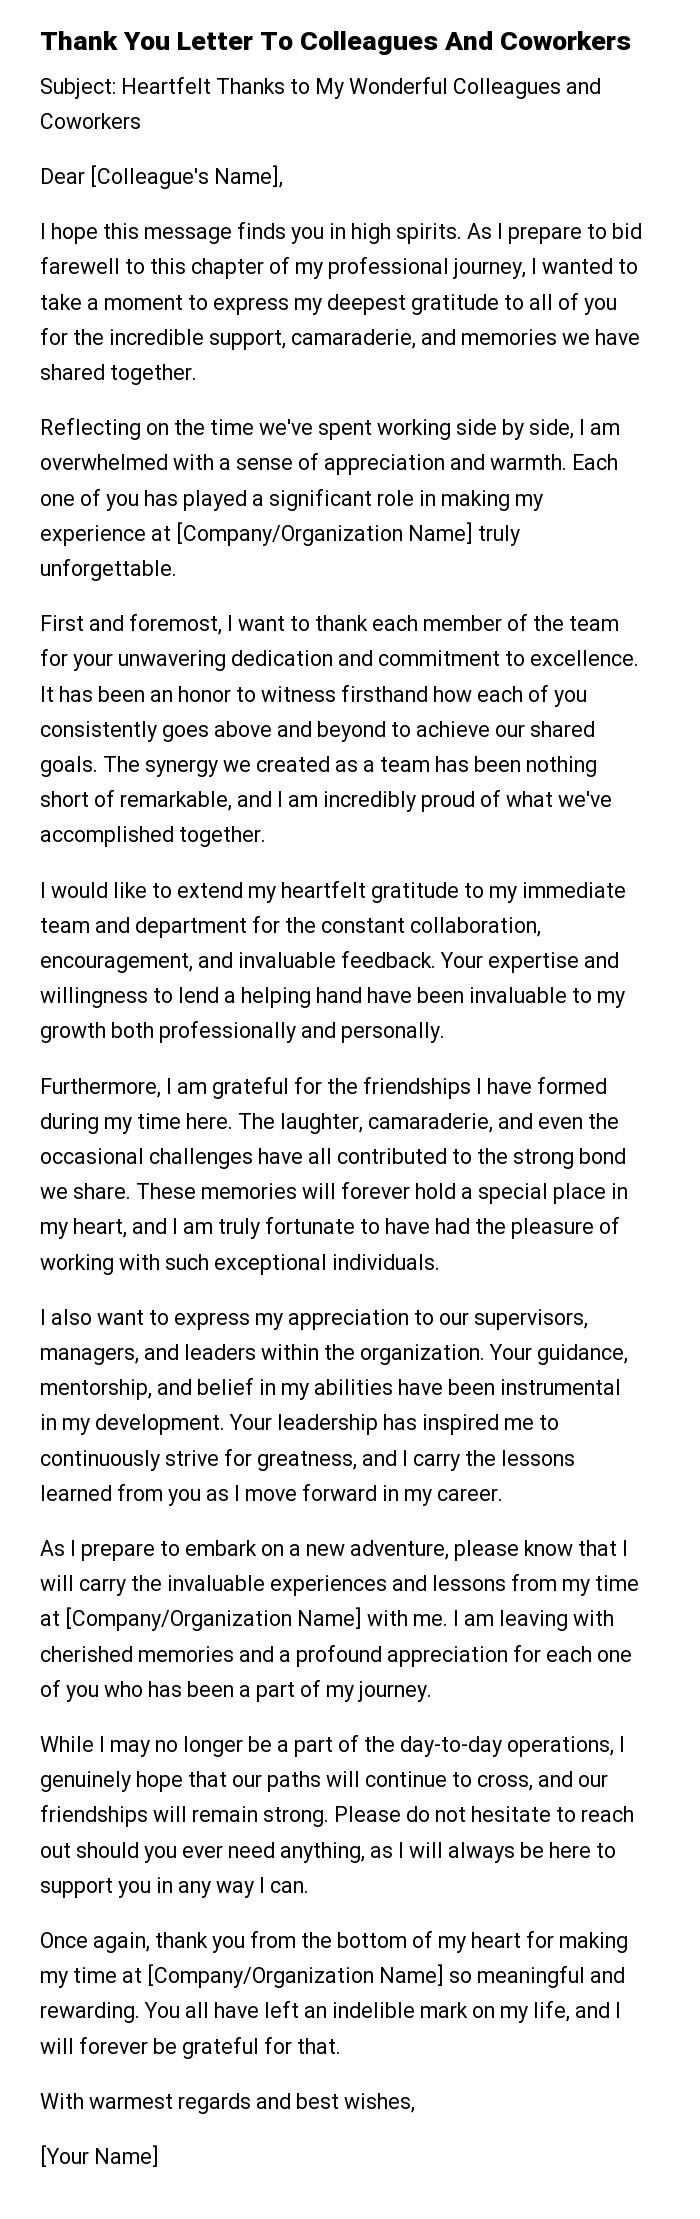 Thank You Letter To Colleagues And Coworkers